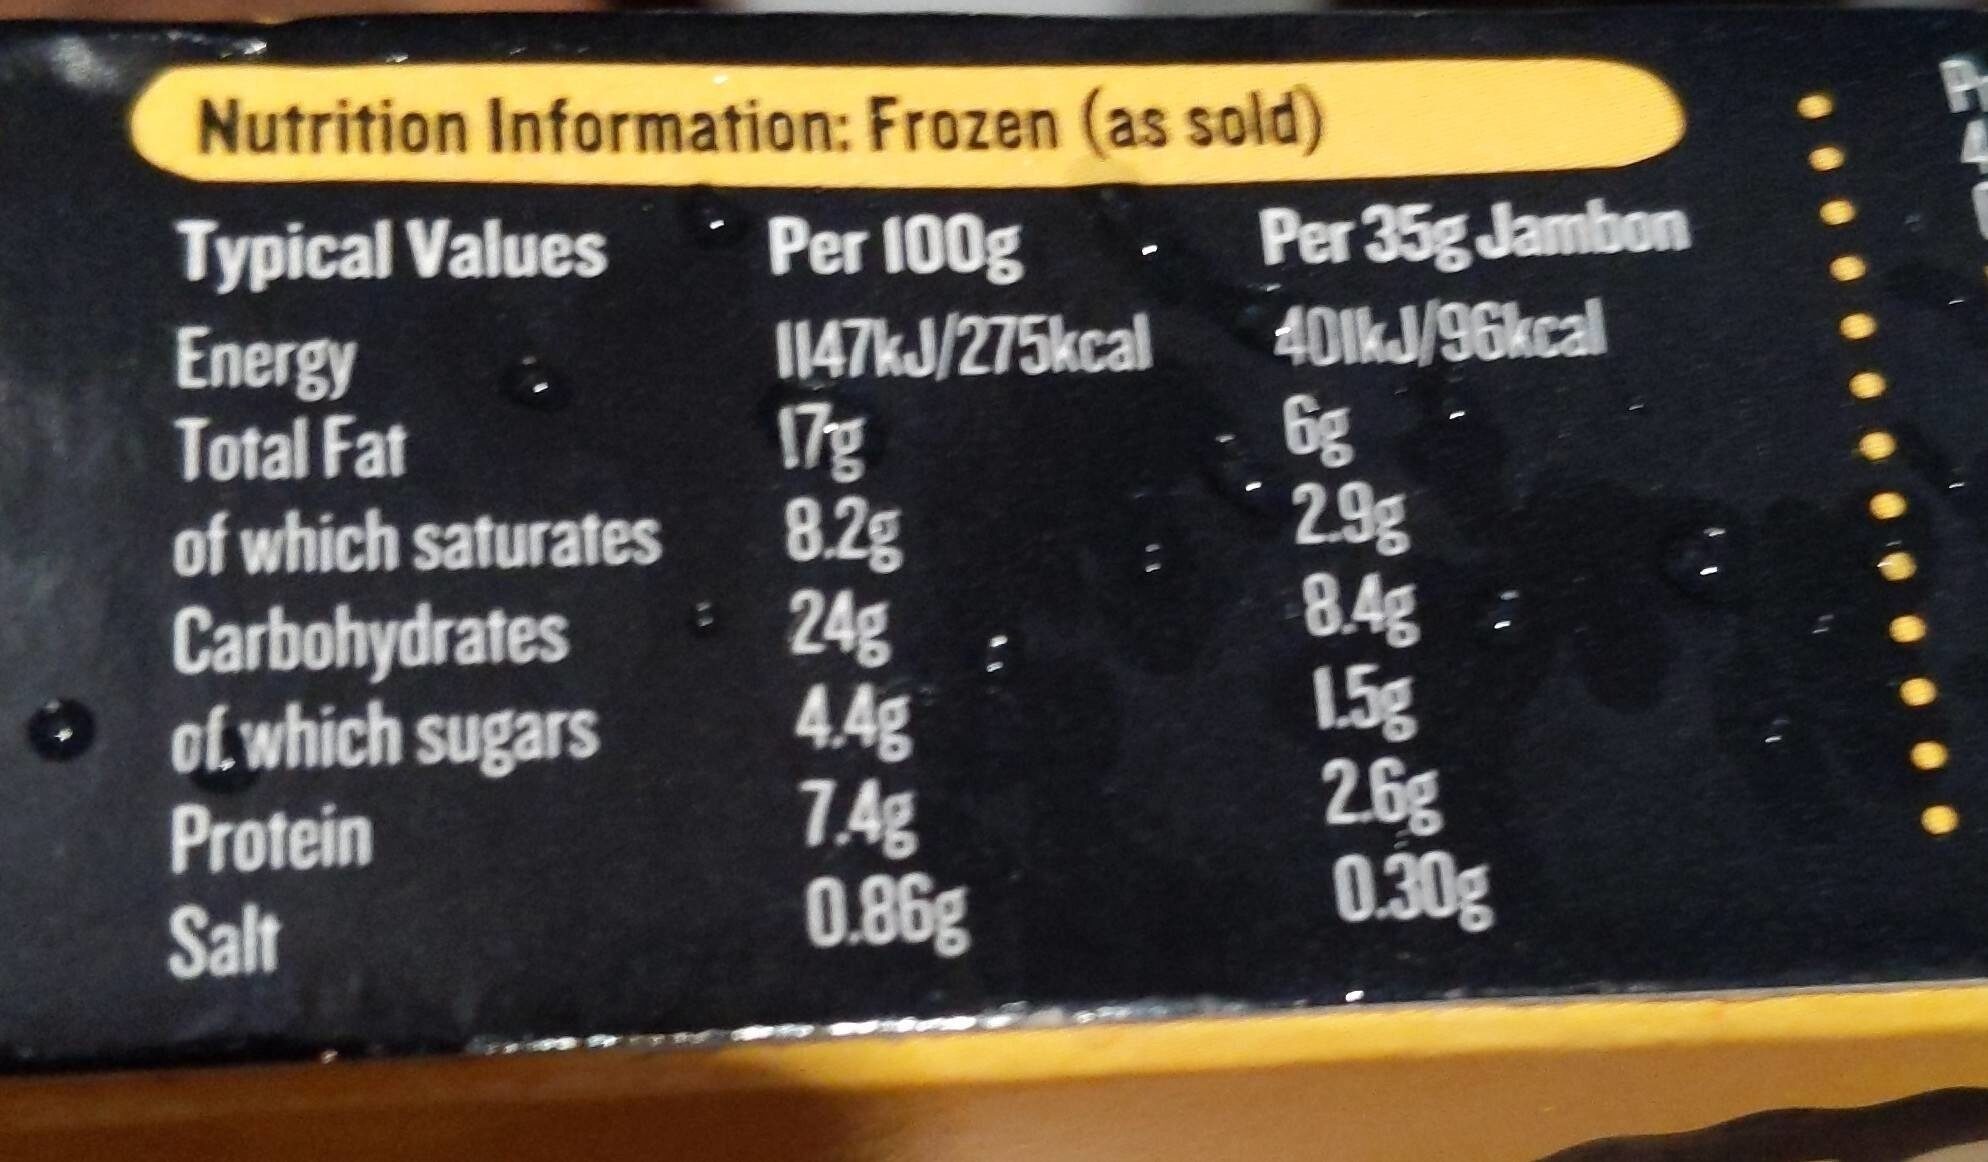 Mini ham and cheese jambons - Nutrition facts